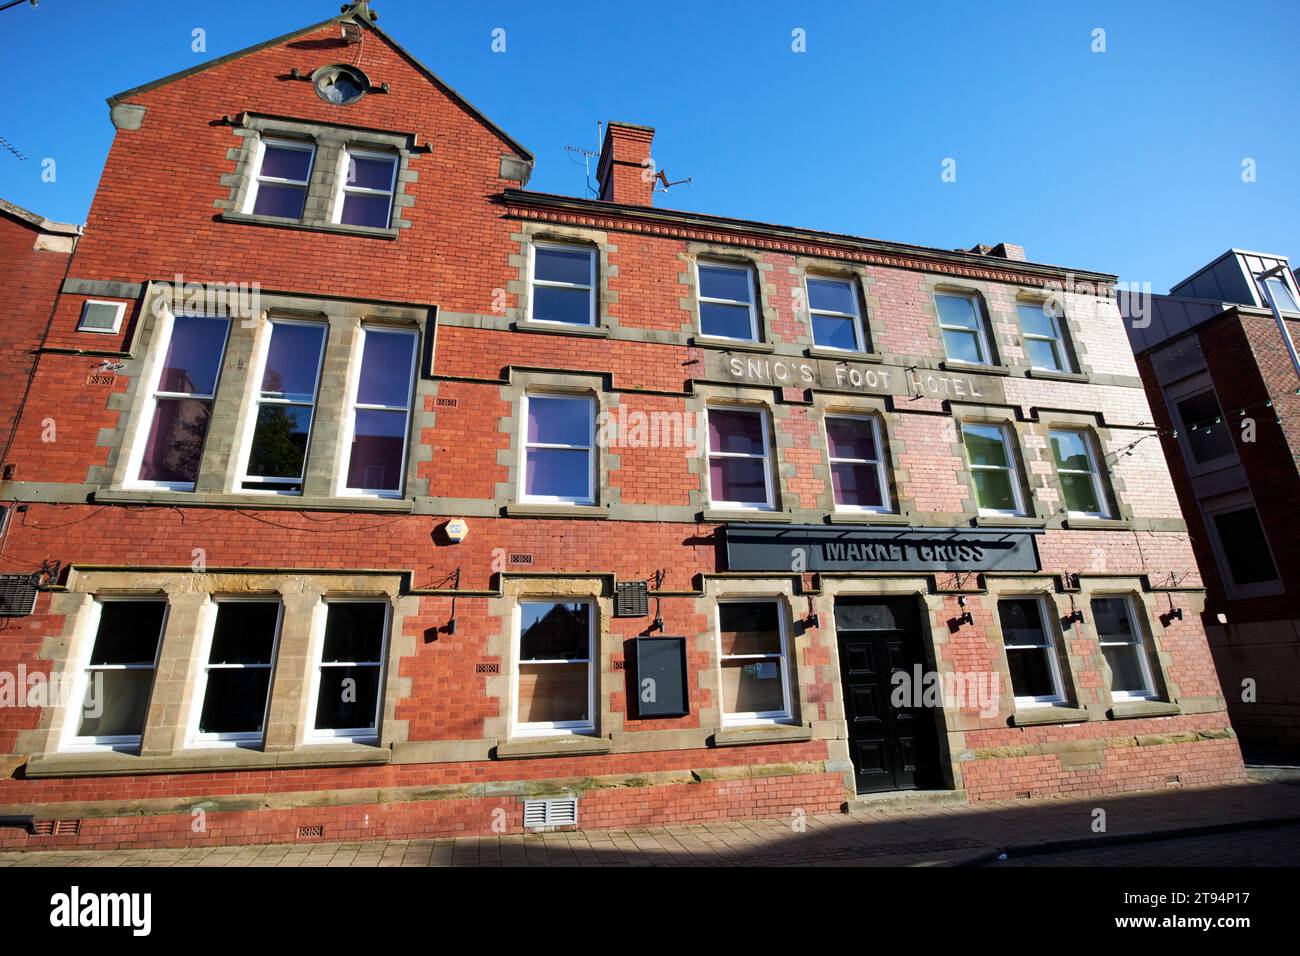 former snigs foot hotel previously the letters and then market cross pub ormskirk, lancashire, england, uk Stock Photo